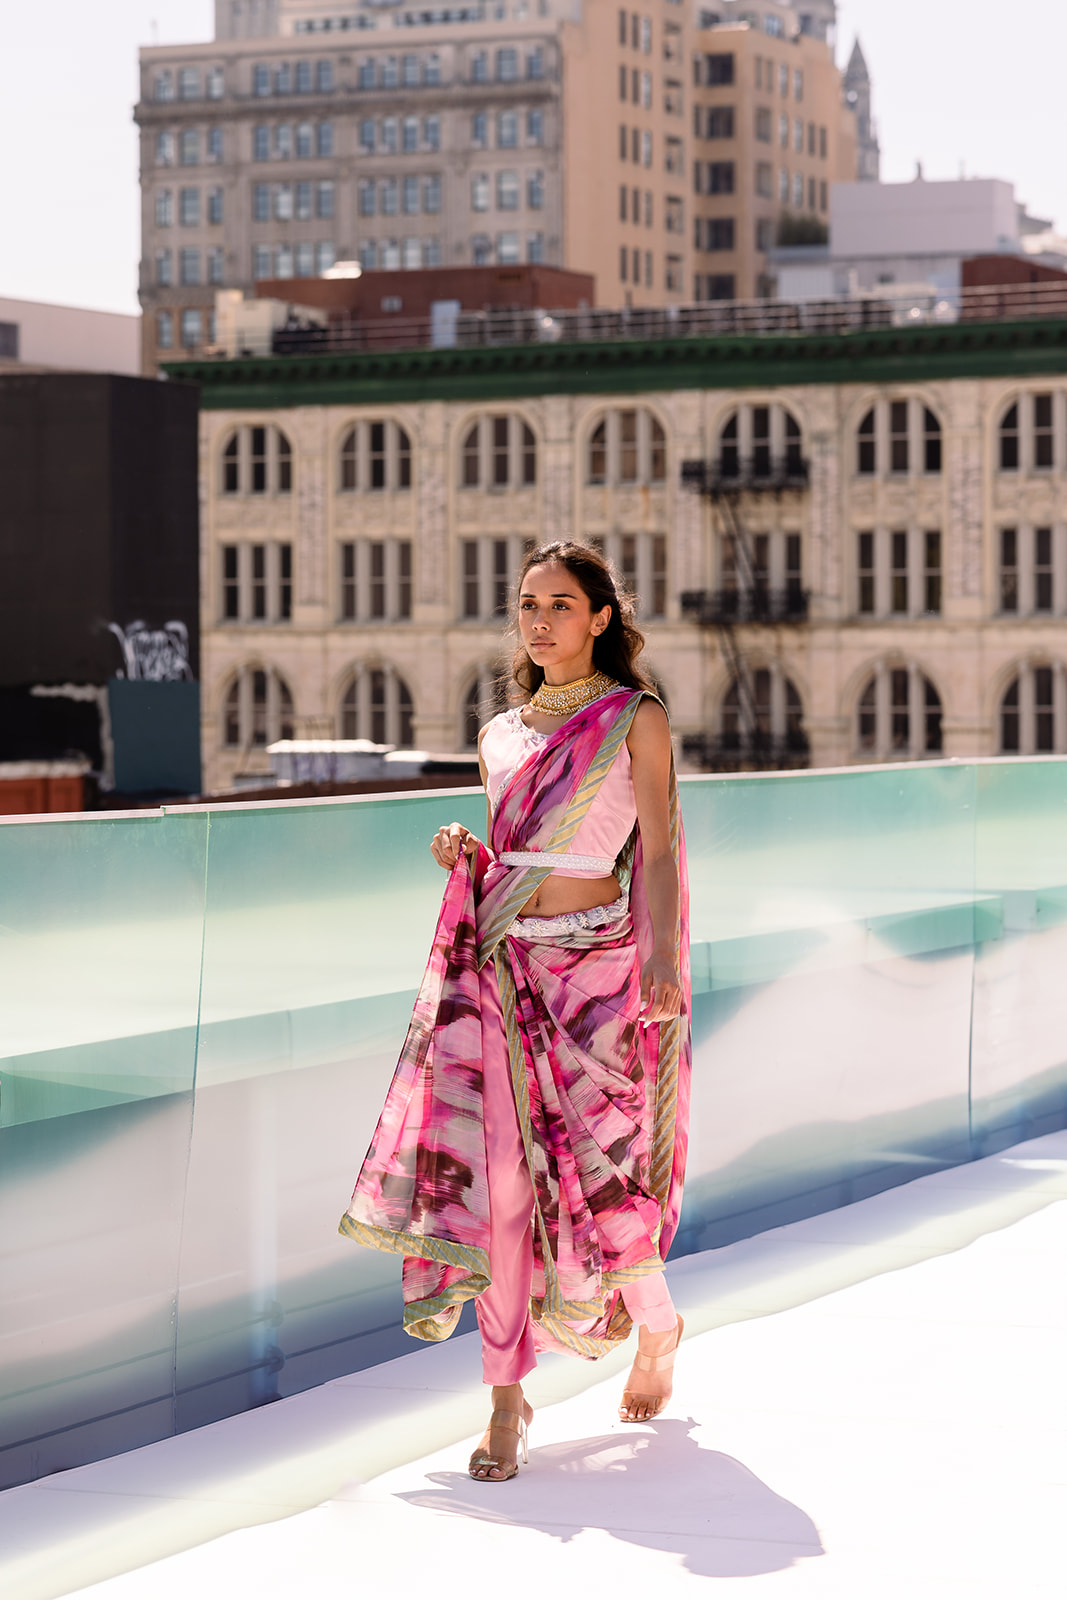 NYFW model draped in a  sari, a tribute to Ashraf’s mother’s love of saris.